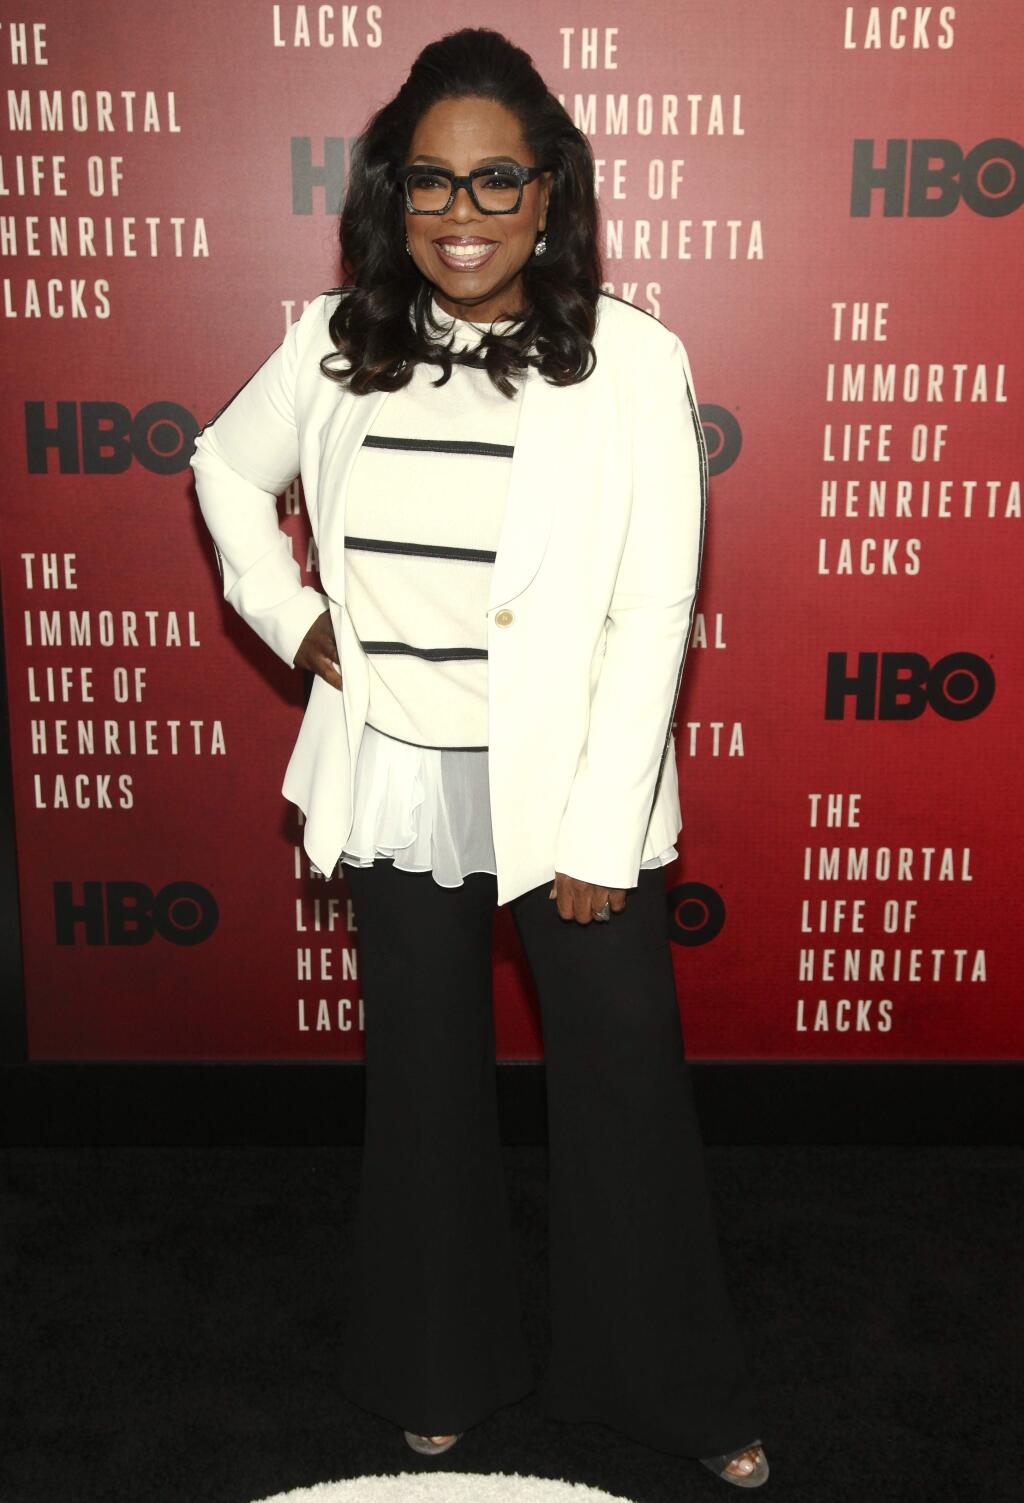 Oprah Winfrey attends the premiere of HBO Films' 'The Immortal Life of Henrietta Lacks' at the SVA Theatre on Tuesday, April 18, 2017, in New York. (Photo by Andy Kropa/Invision/AP)